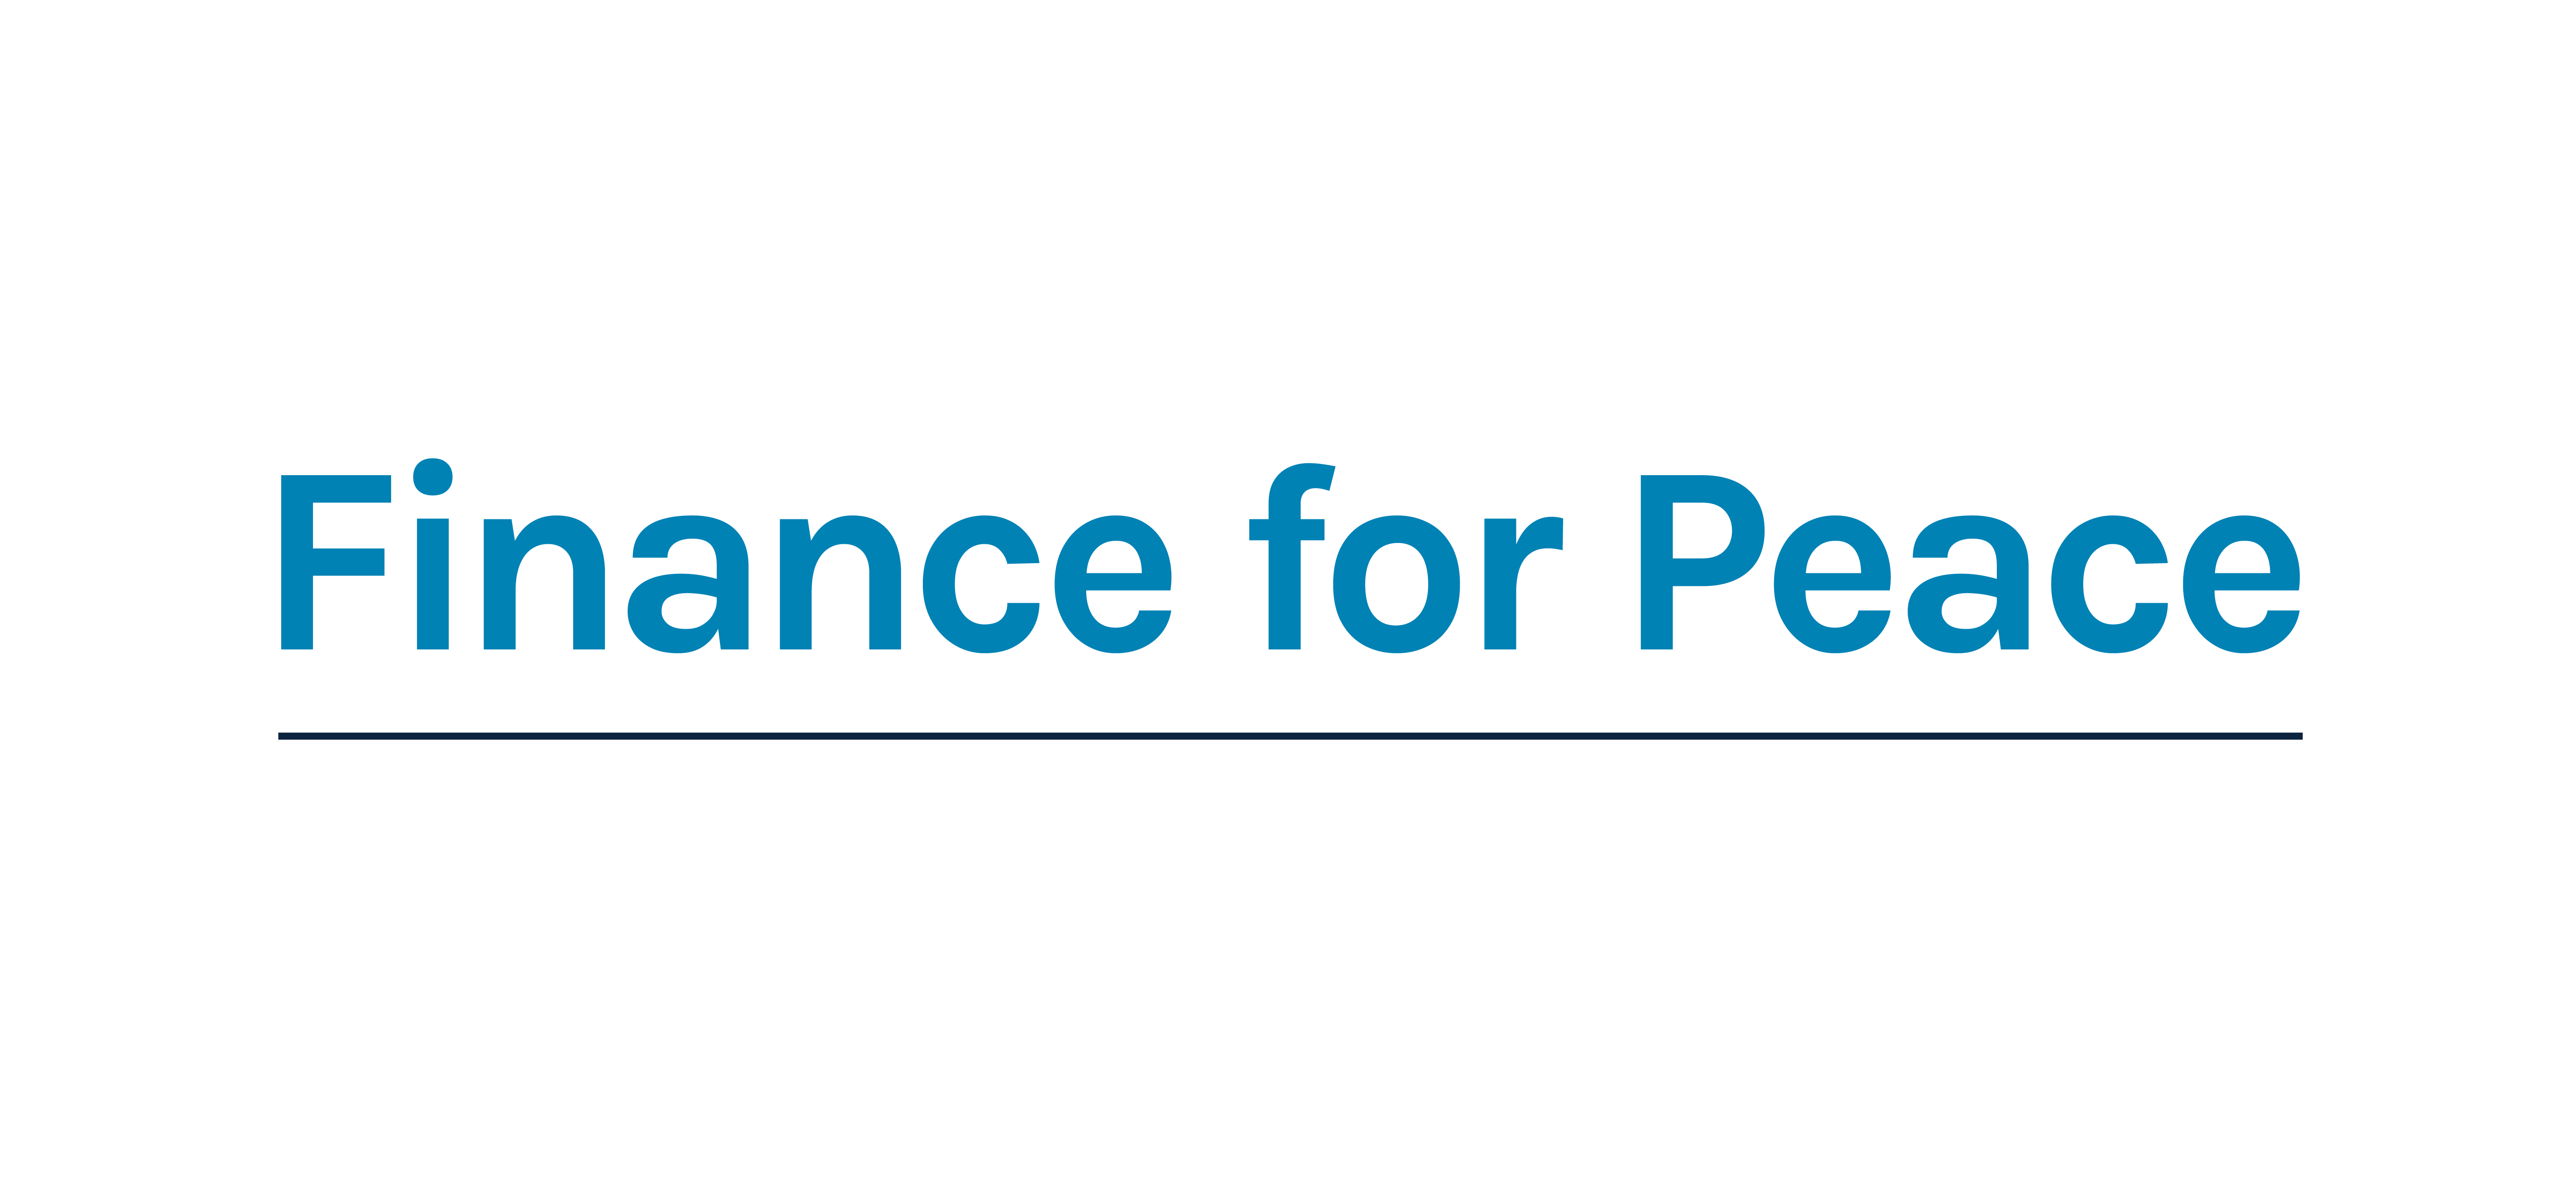 Finance for Peace